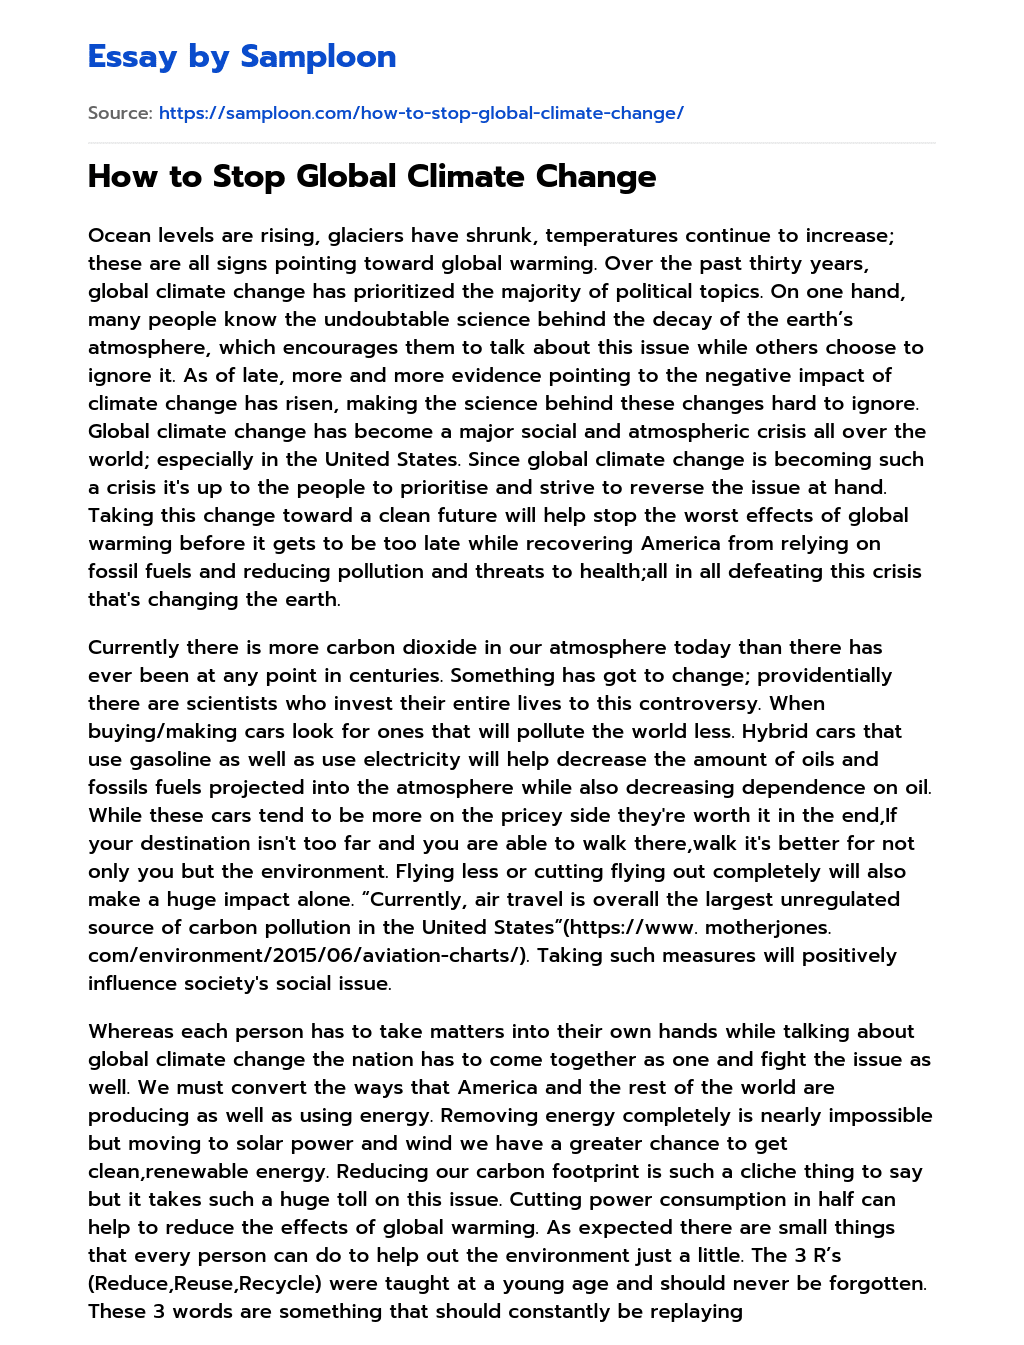 How to Stop Global Climate Change essay